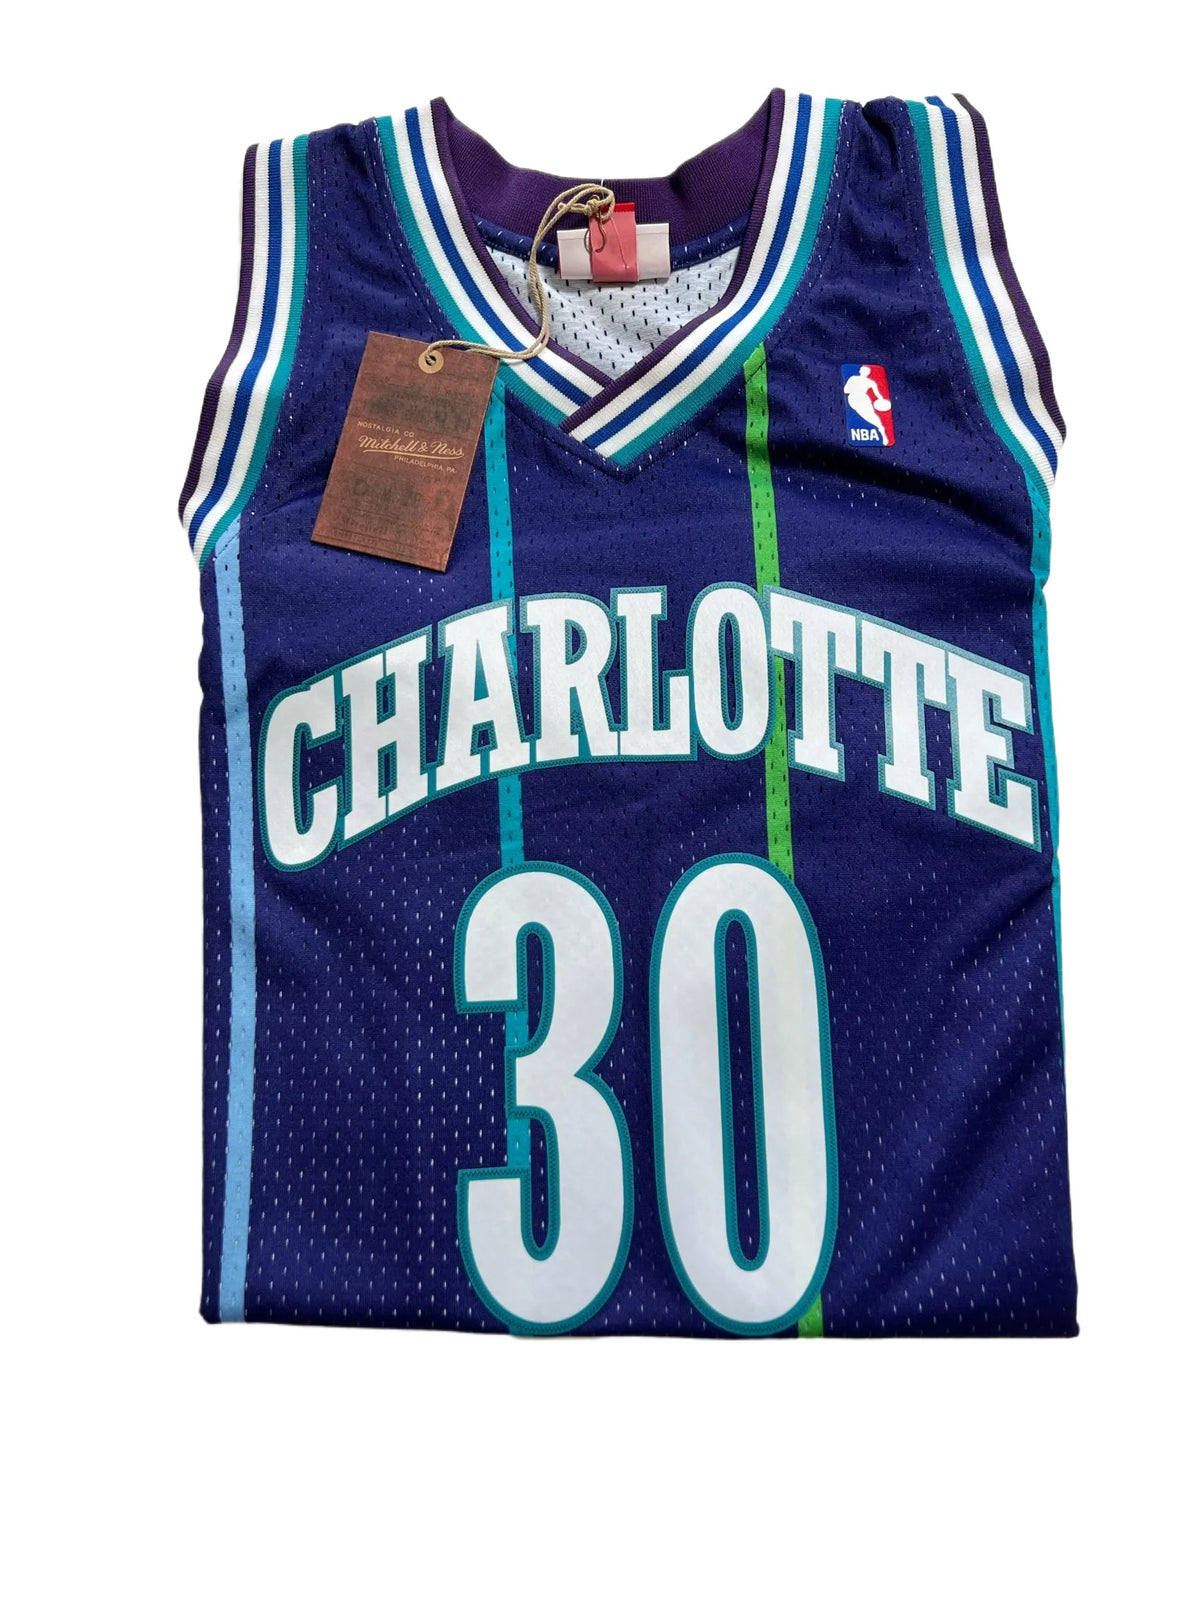 Hardwood Classics- "Charlotte" Basketball Jersey New With Tags!